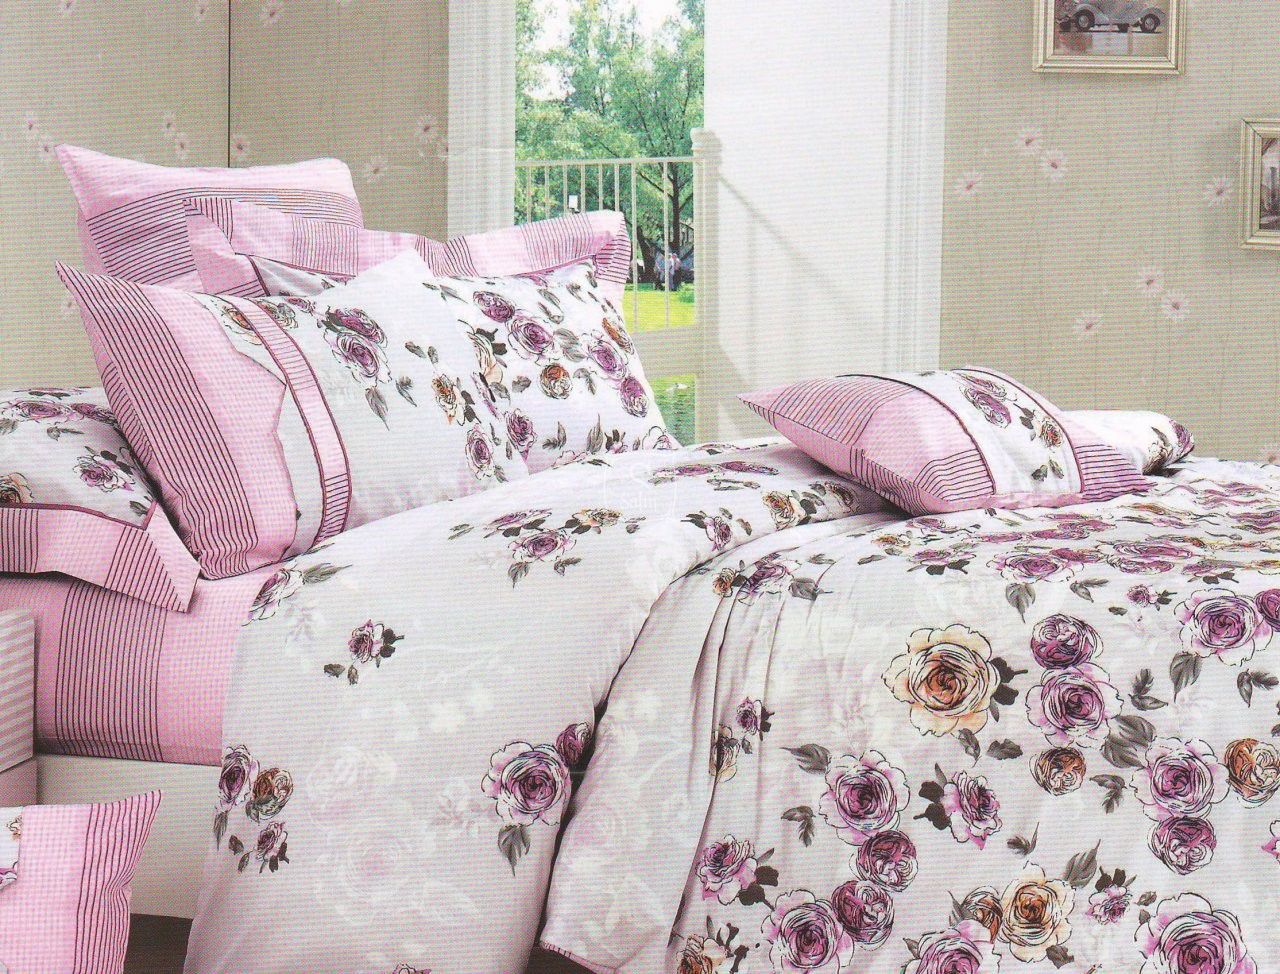 Ranking of the best bedding manufacturers in 2020